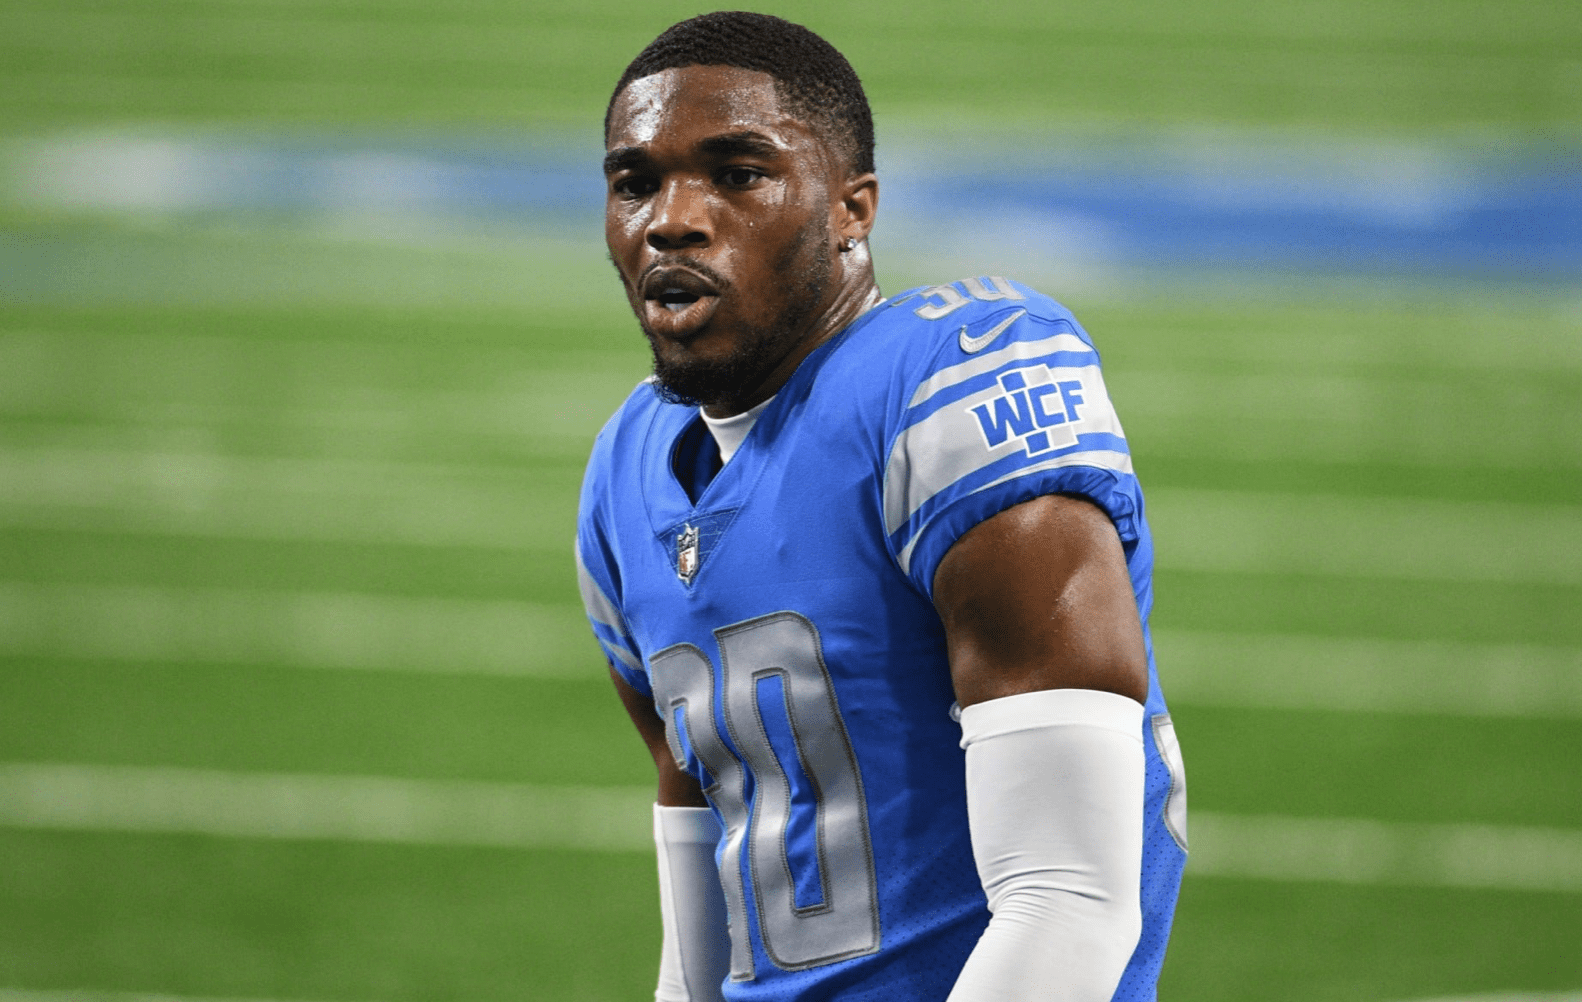 Breaking: Detroit Lions send CB Jeff Okudah to the Falcons for a 5th-round pick